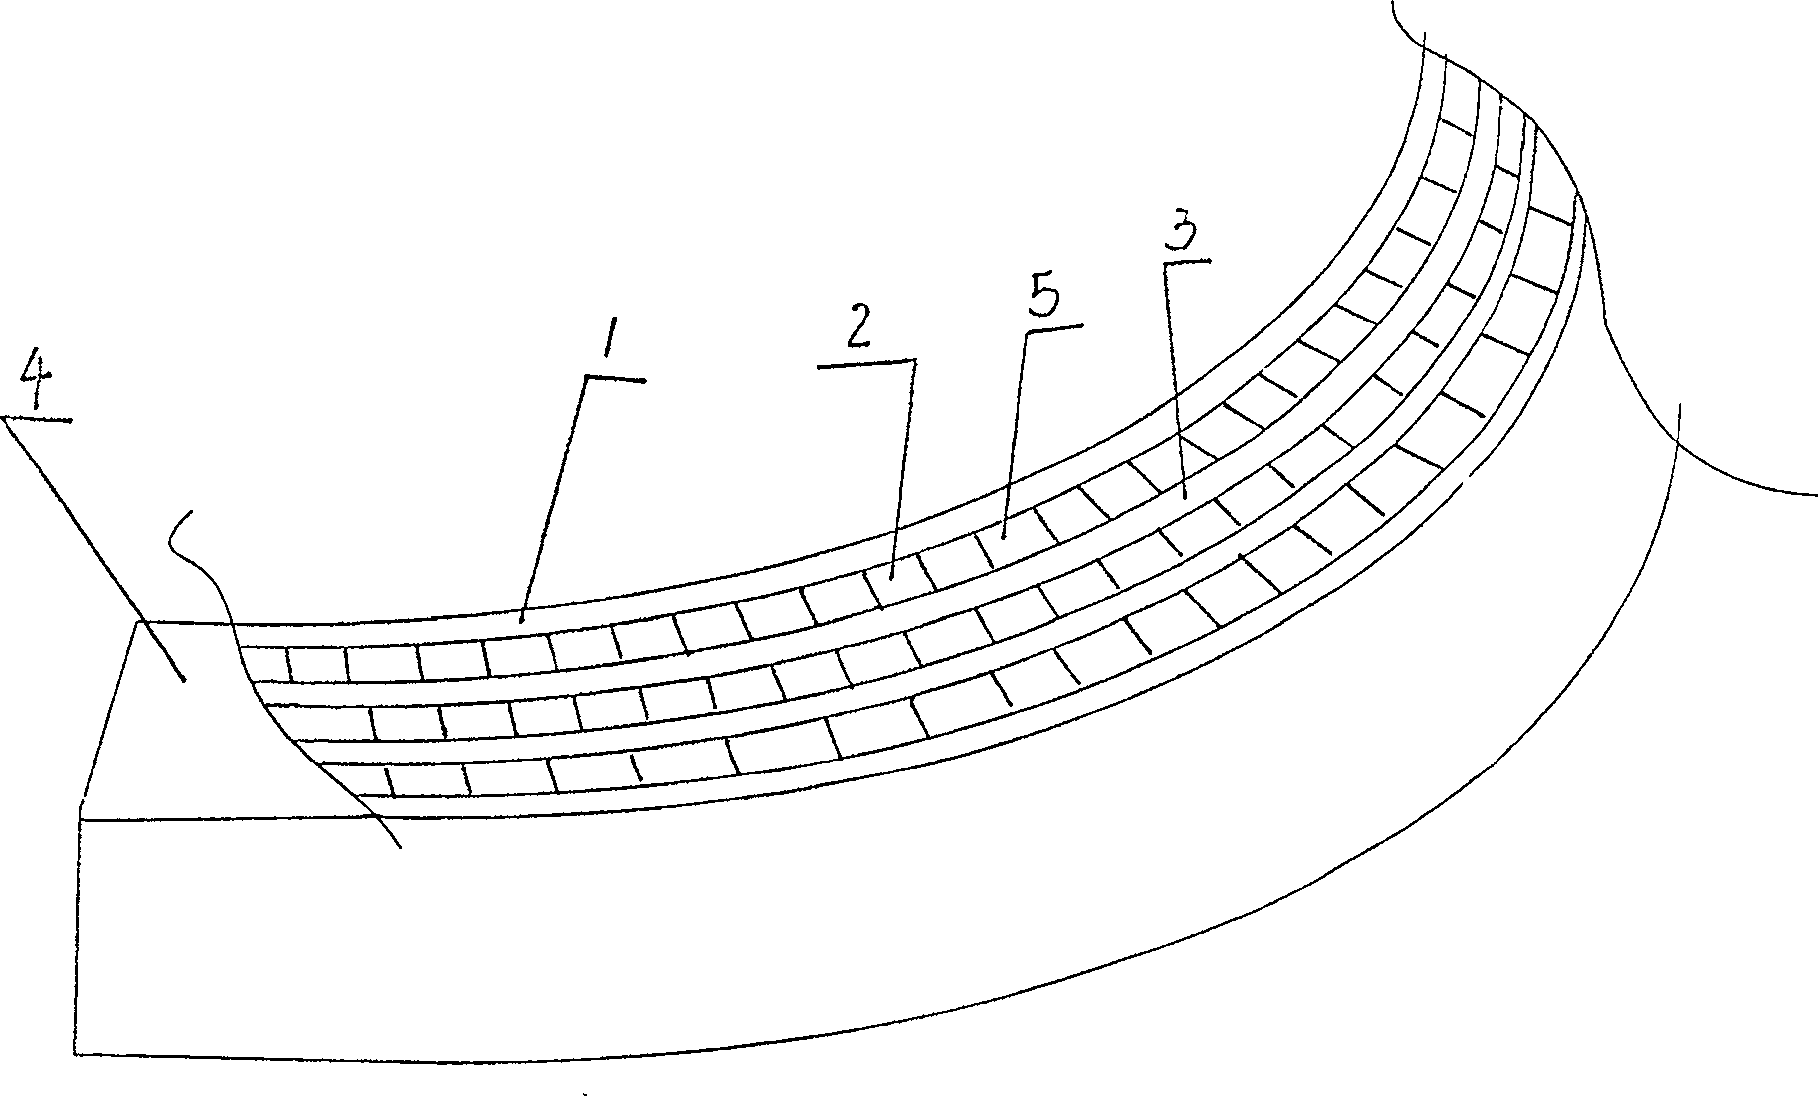 Wooden stair beam and method for making same